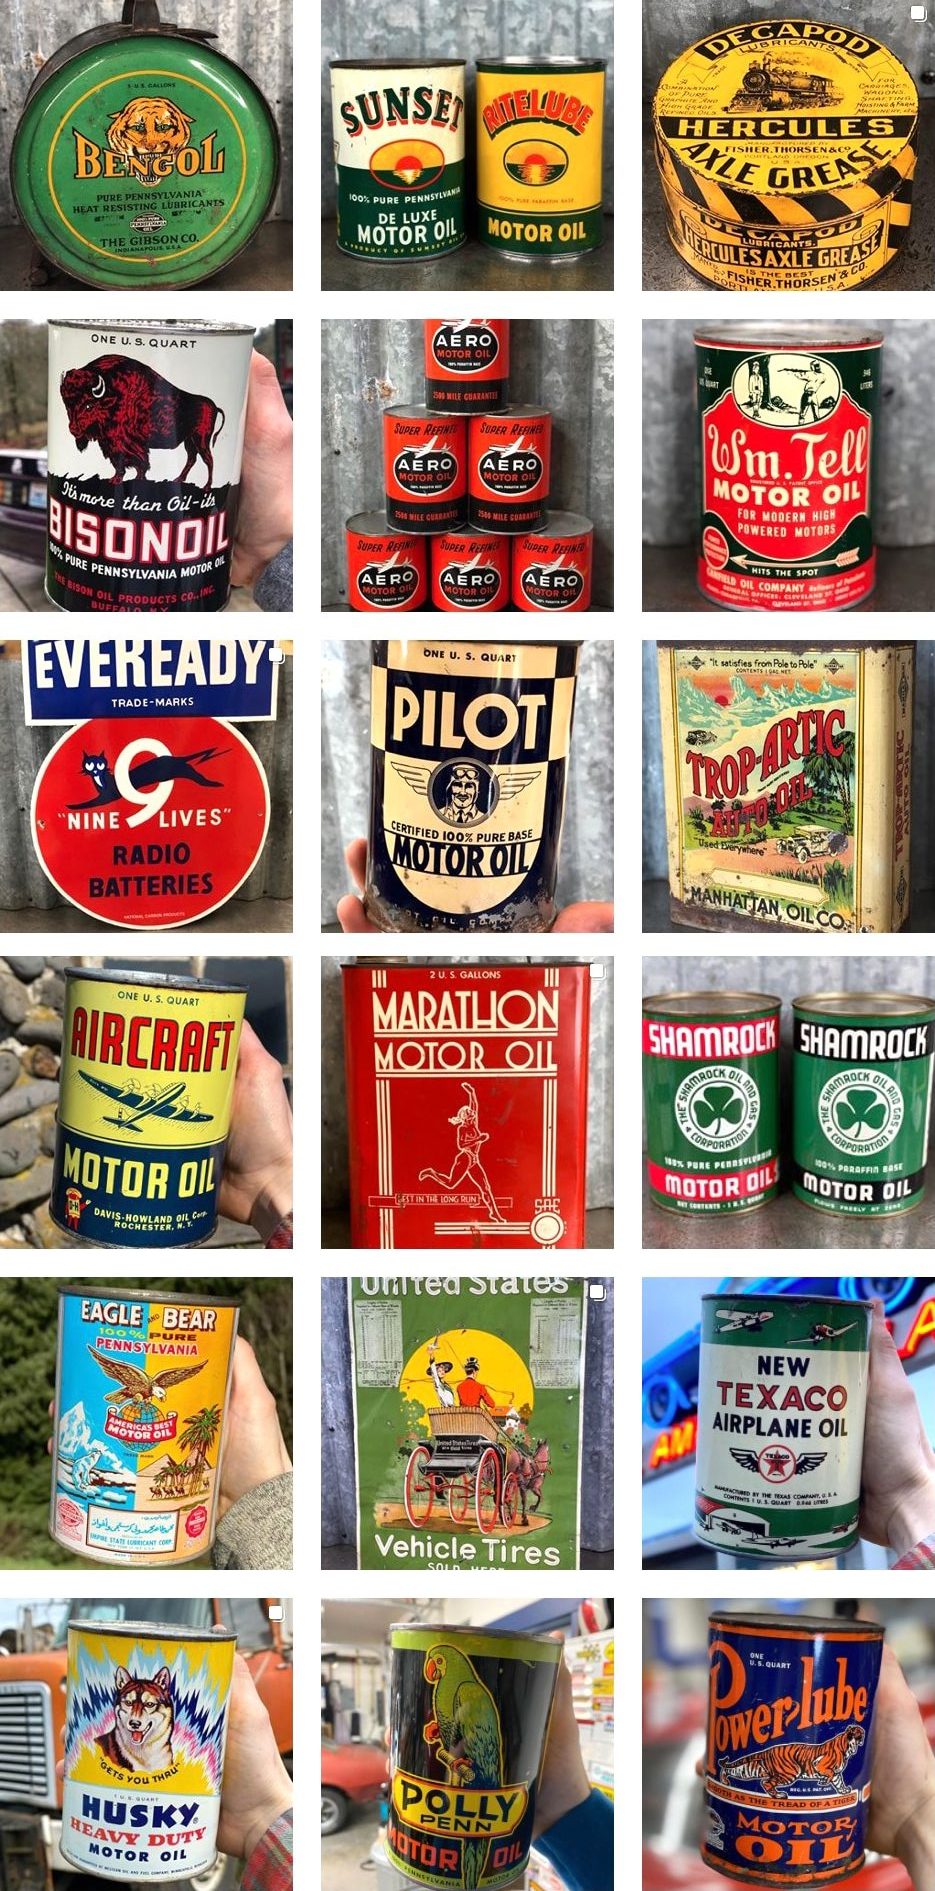 tntpetroliana Vintage Can-Gas-&-oil antique Graphic Oil Cans PETROLIANA